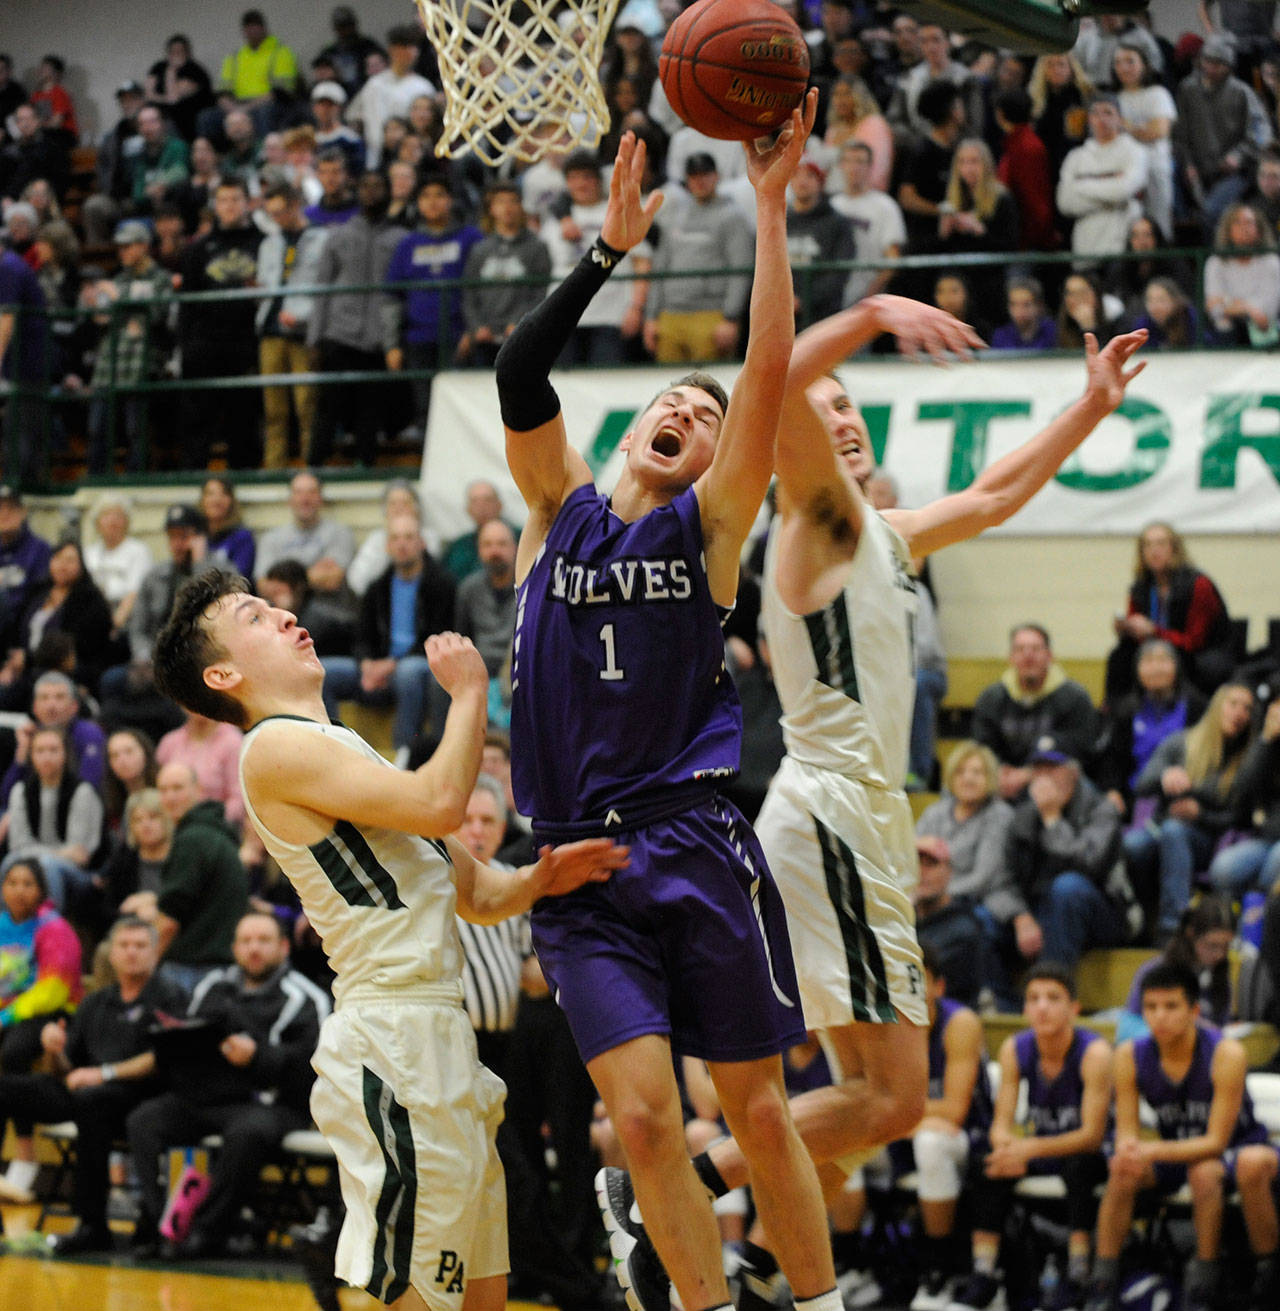 Boys basketball: Sequim rebounds from rout, clobbers Kingston